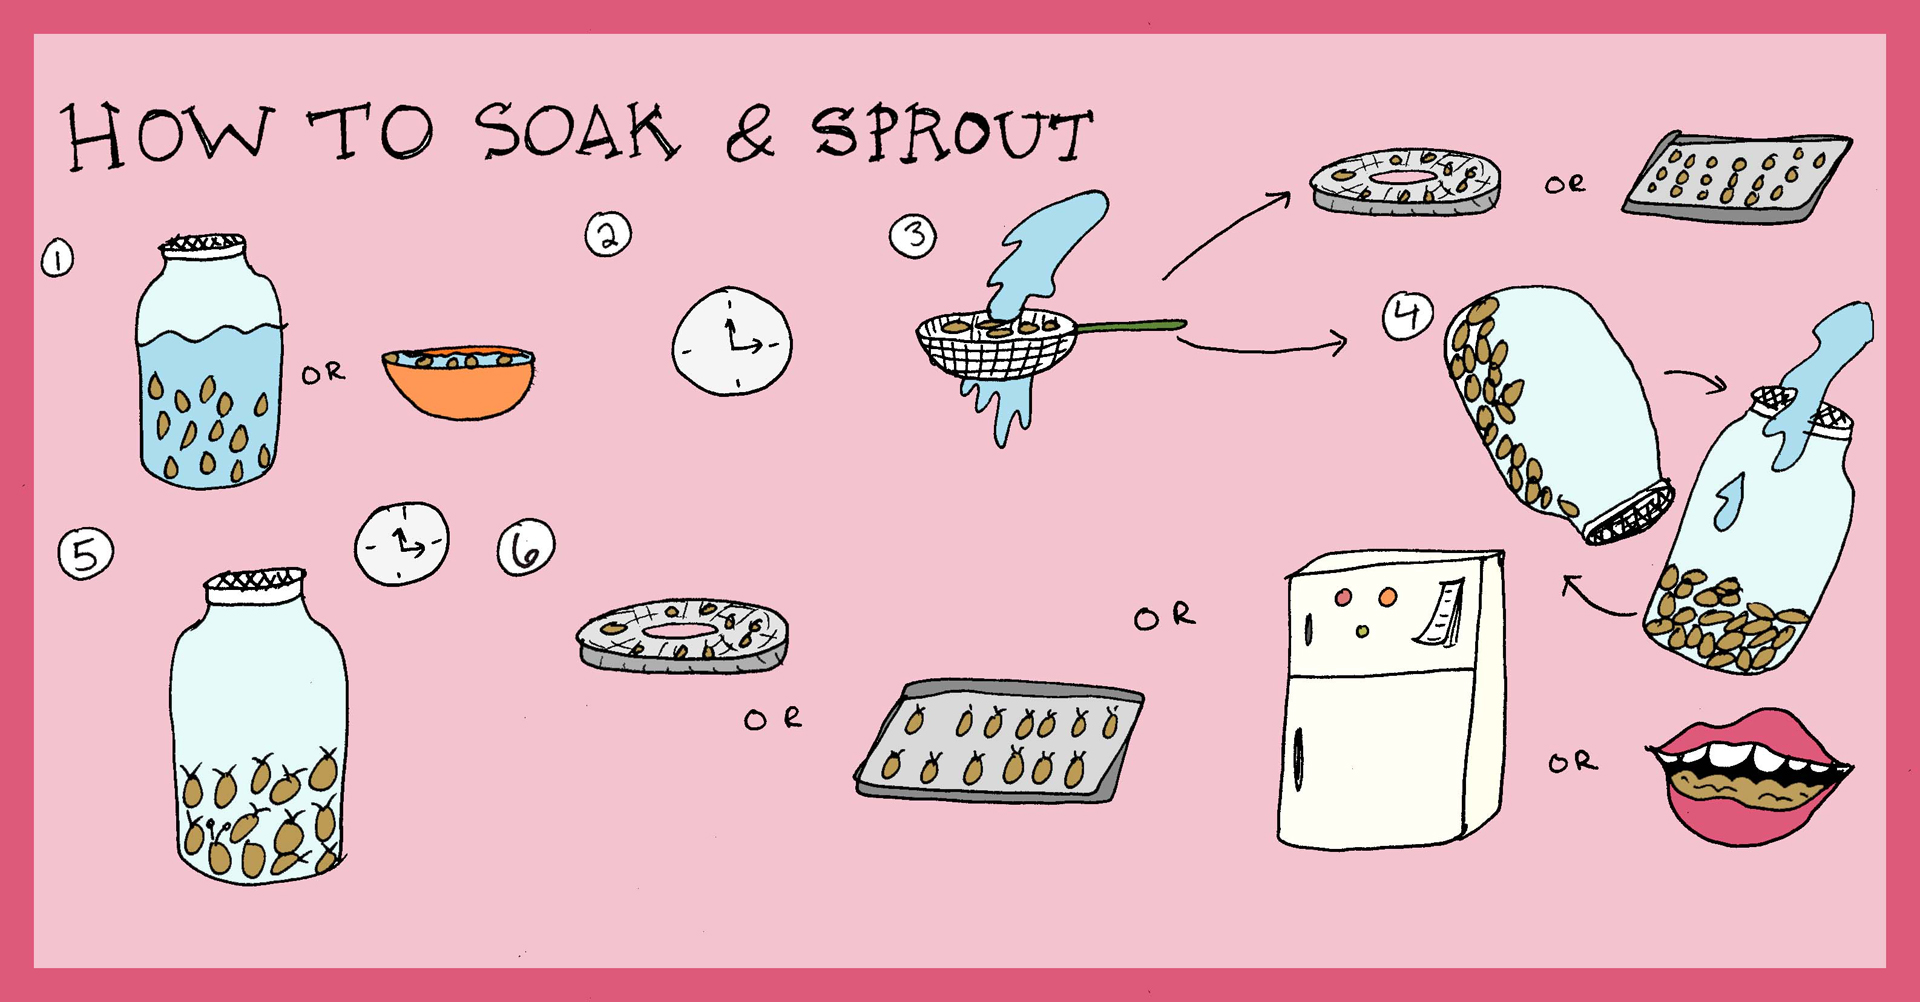 How to Soak & Sprout